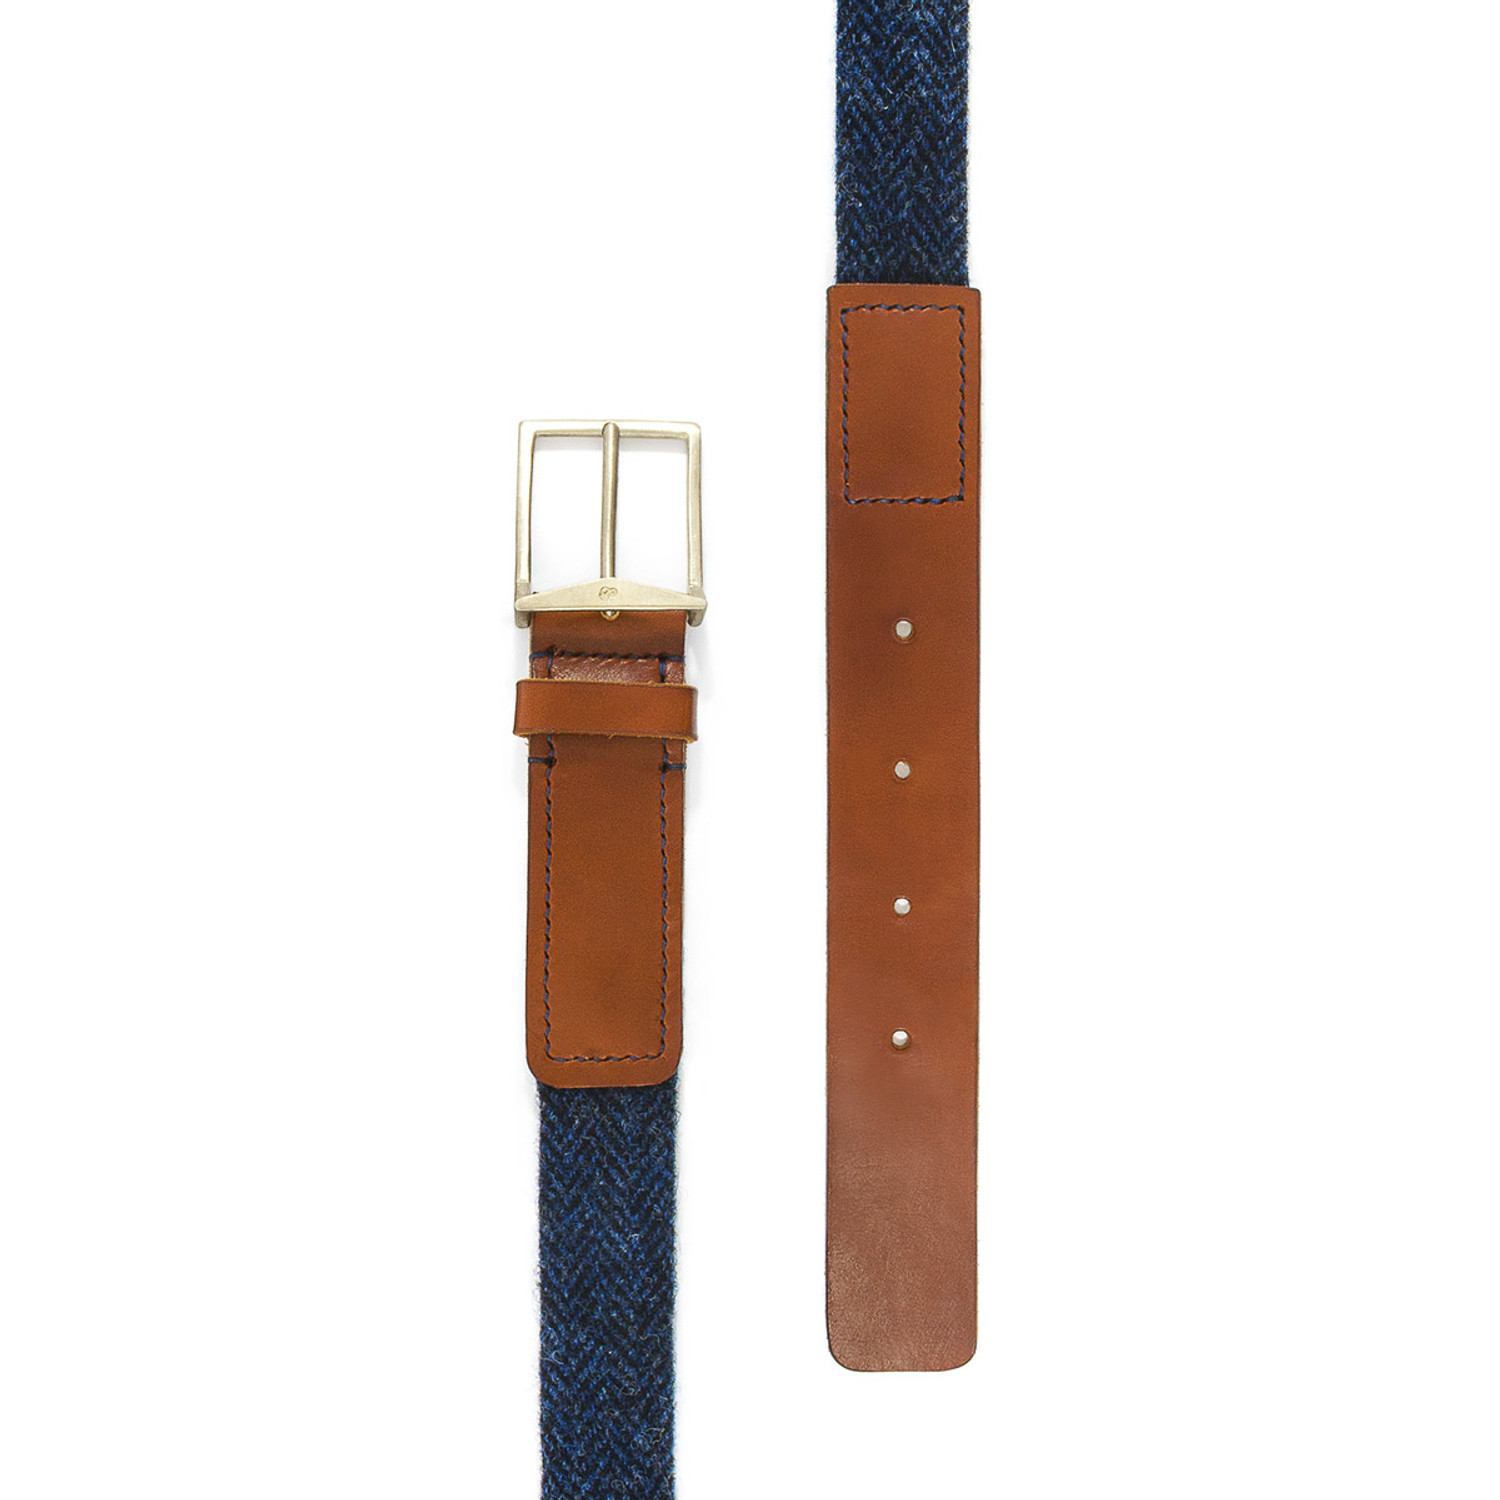 Anchor & Crew Highland Blue Harris Tweed Calway Leather and Nickel Belt